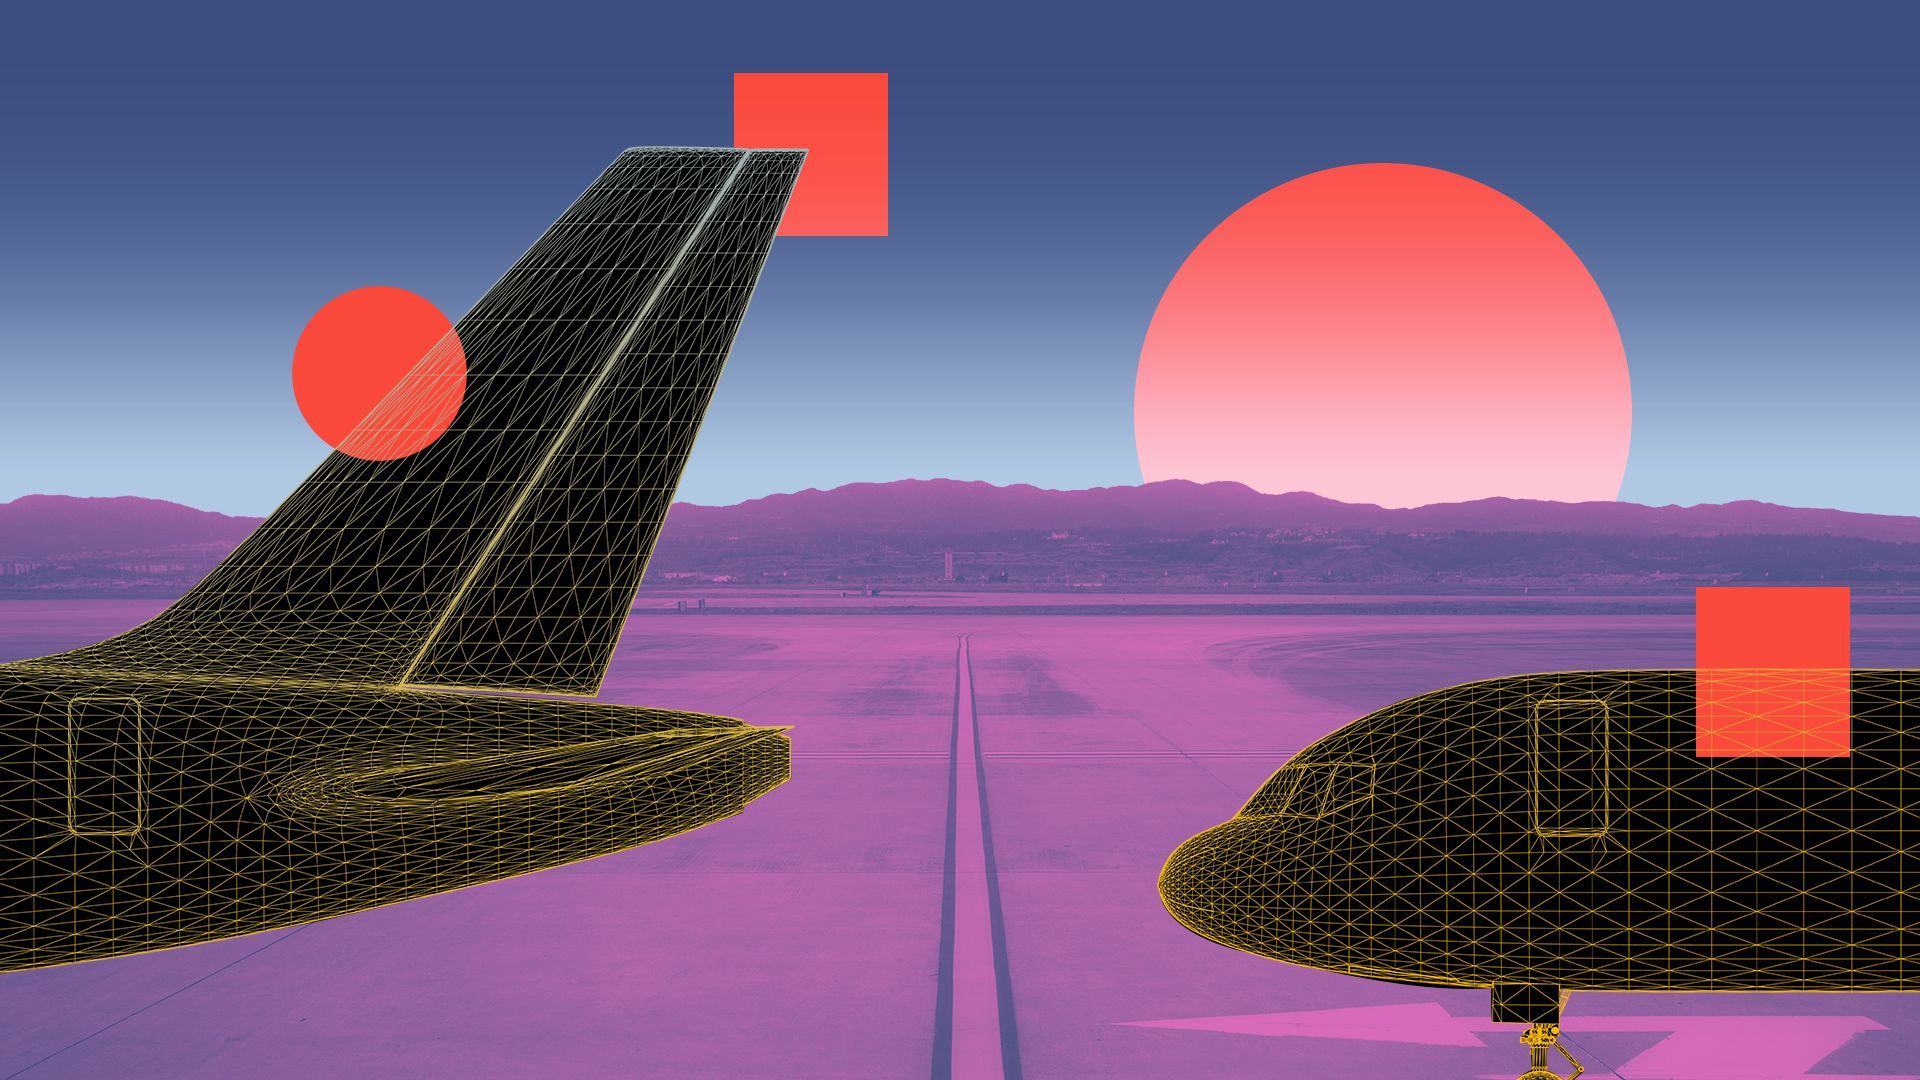 Illustration of a collage featuring two airplaines on an airport tarmac and squares and circles.